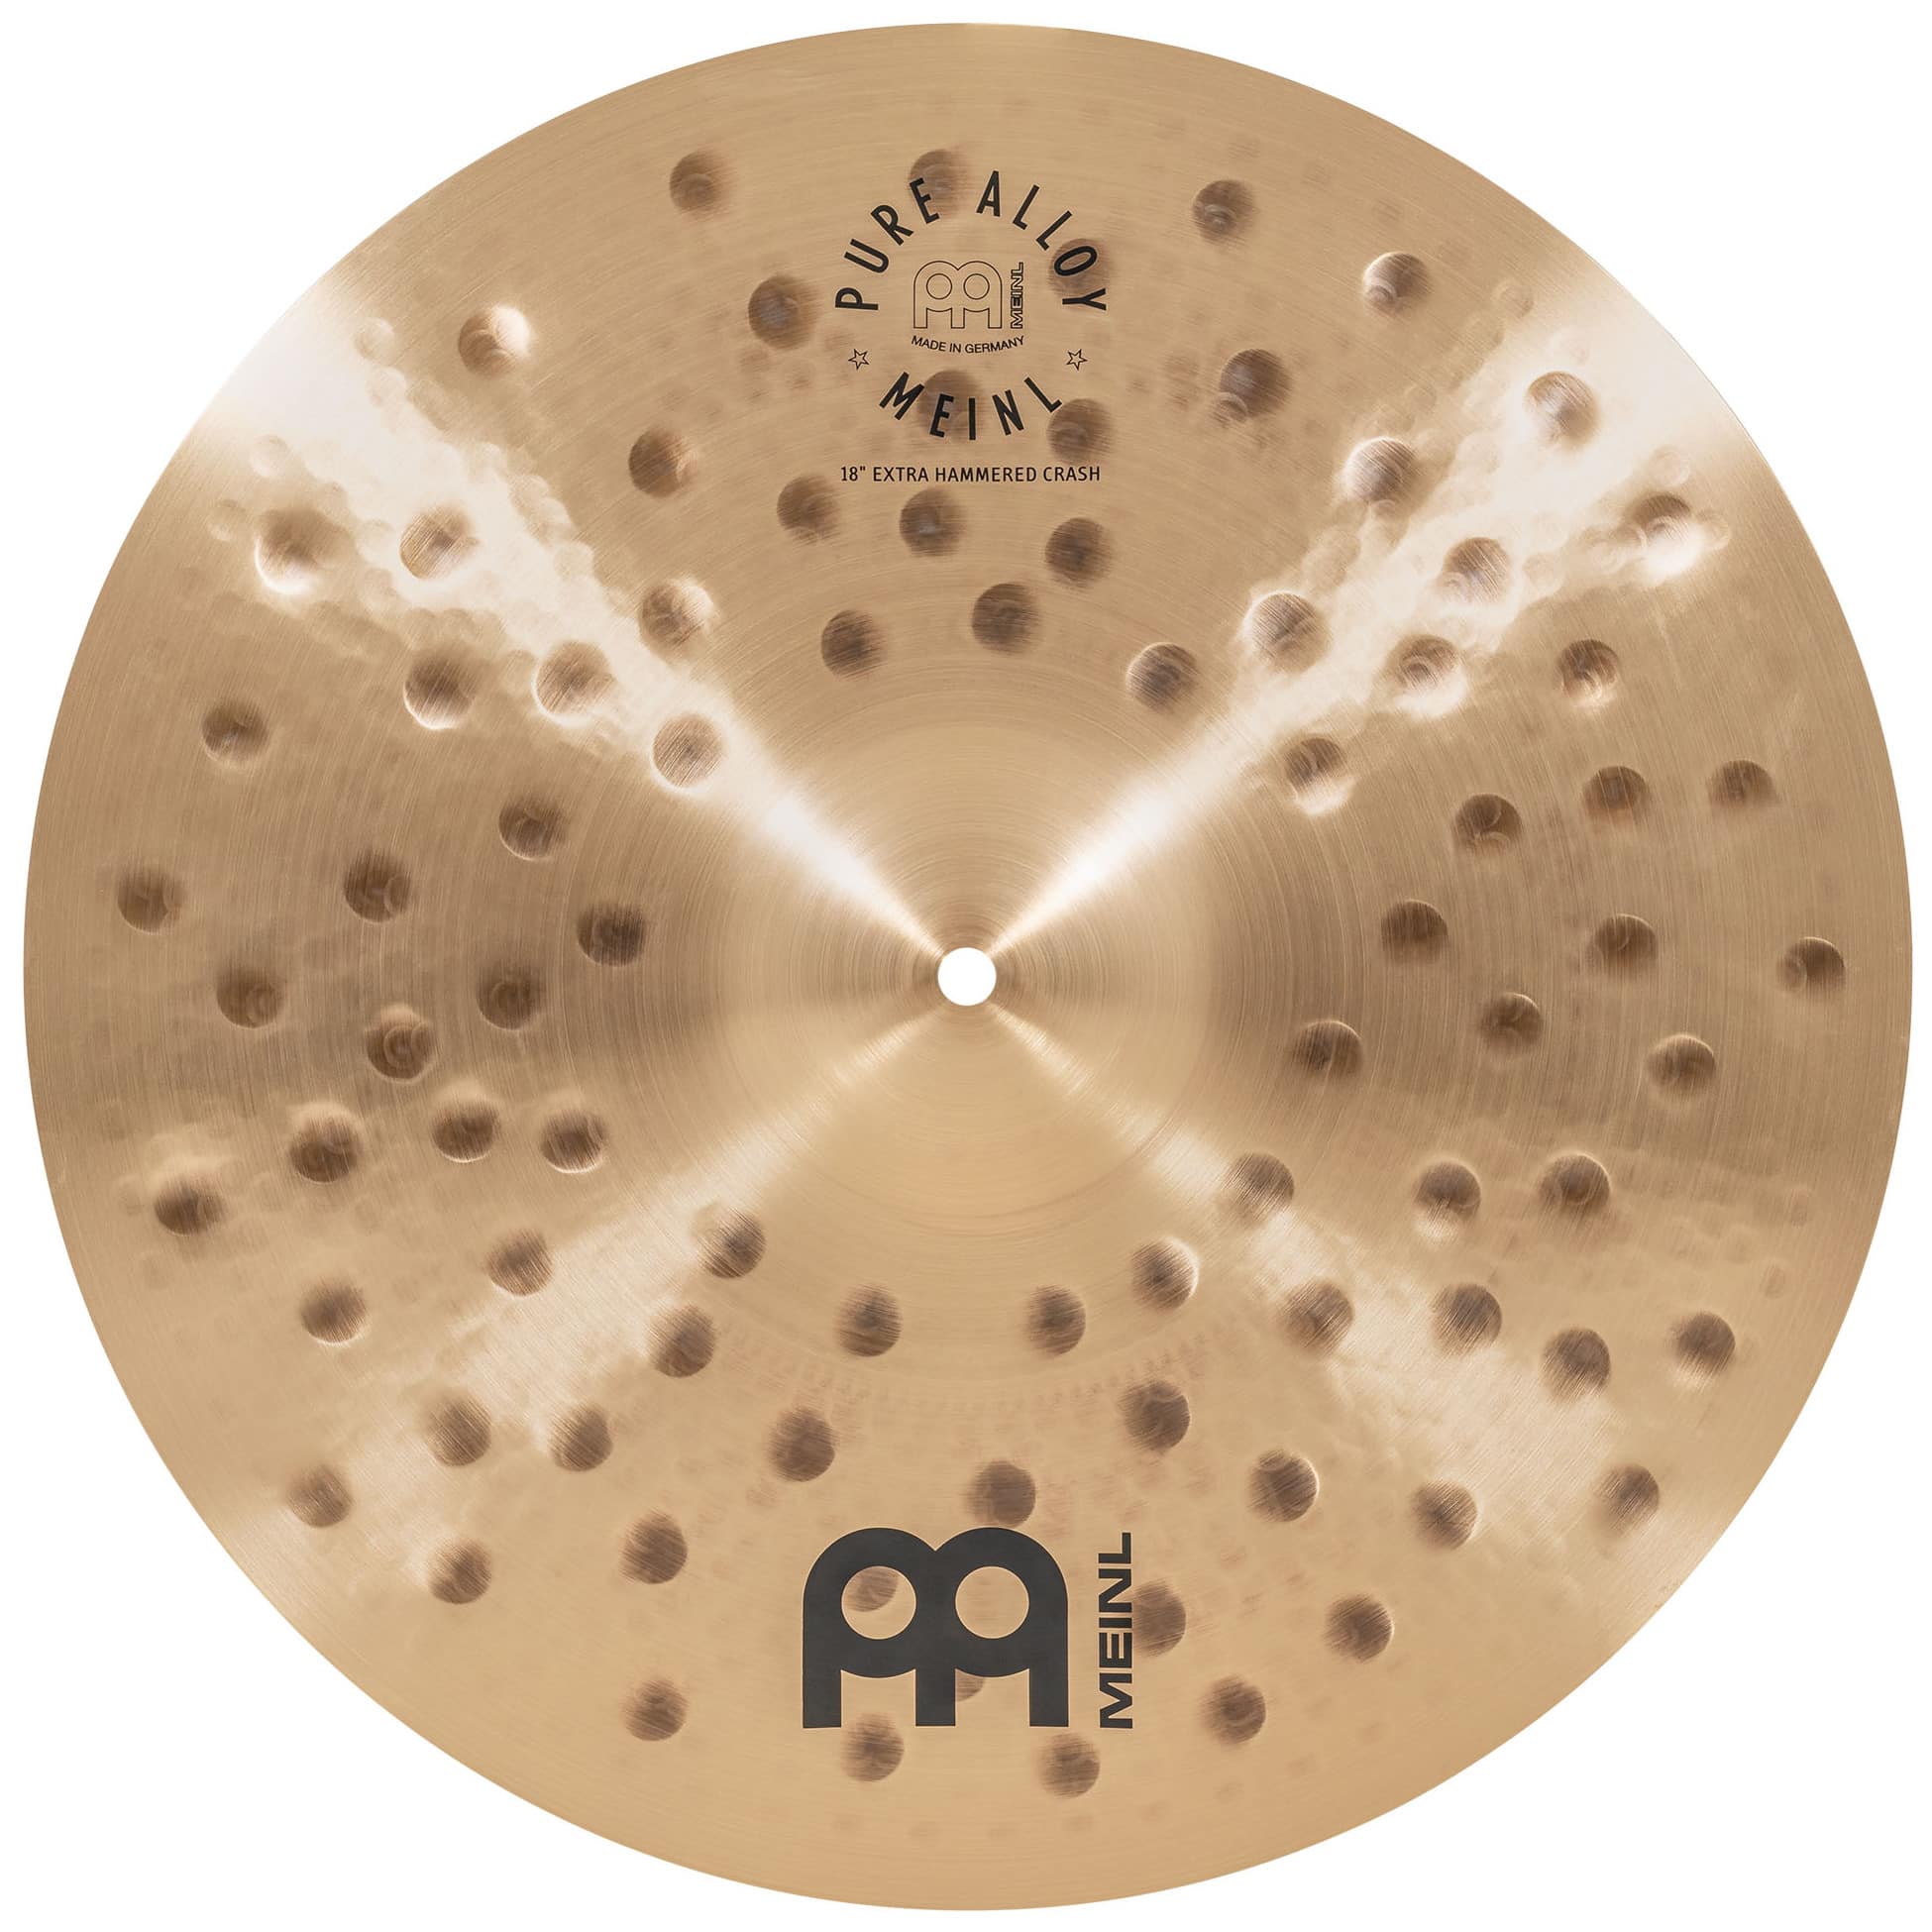 Meinl Cymbals PA18EHC - 18" Pure Alloy Extra Hammered Crash